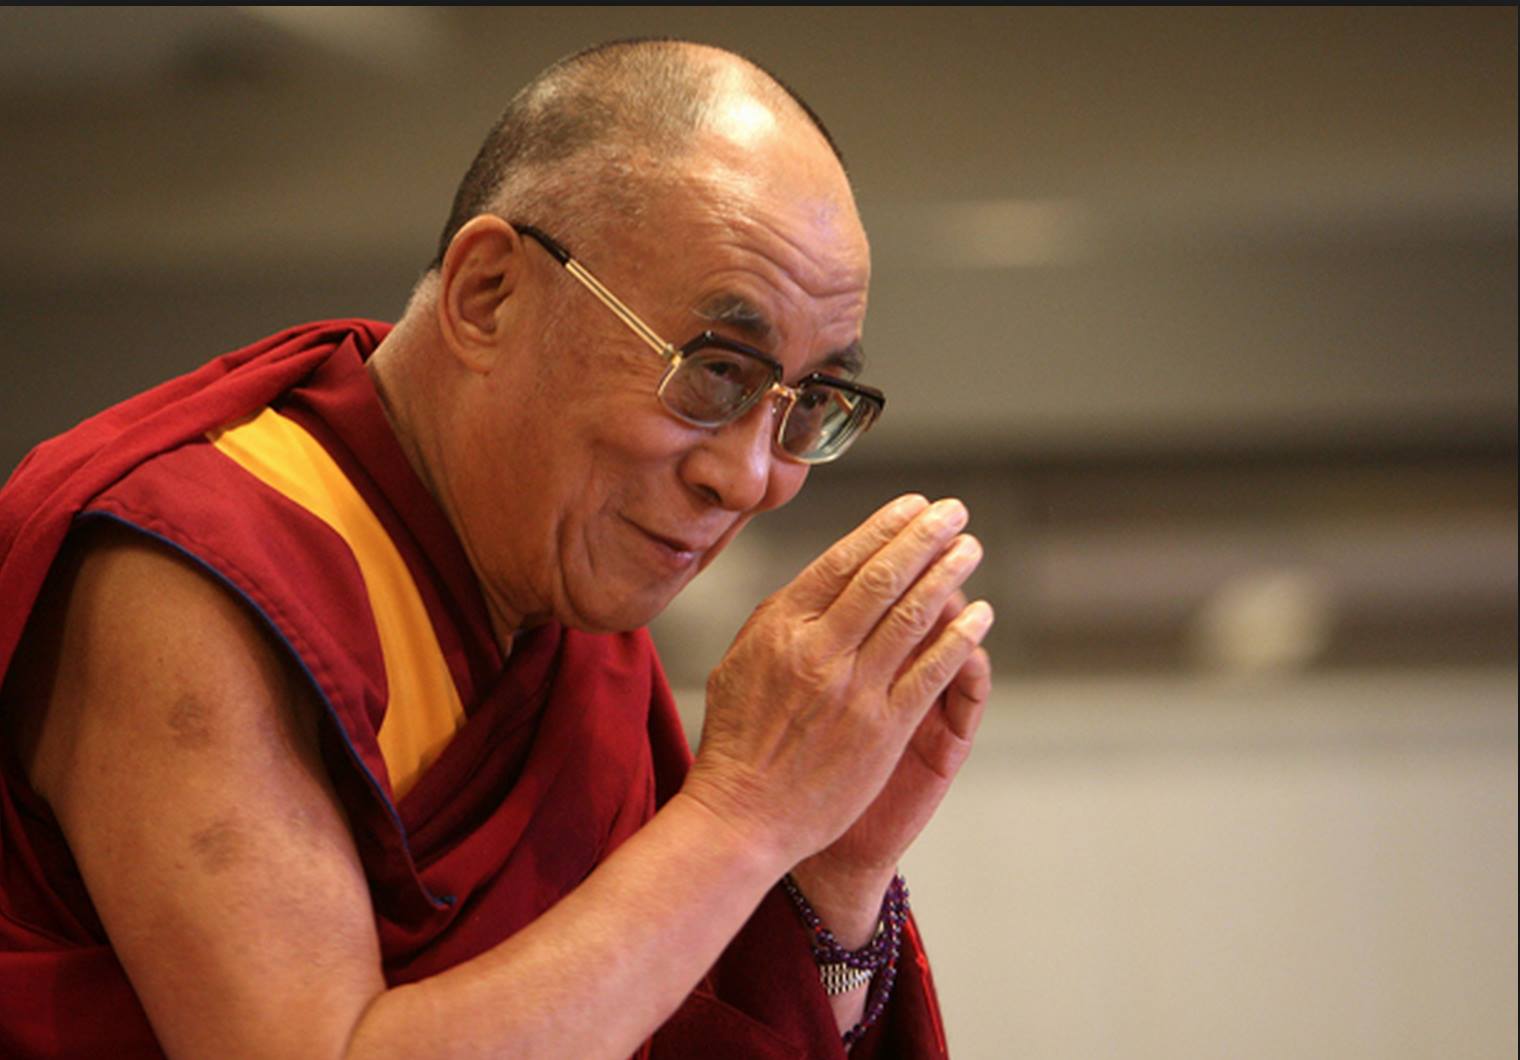 His Holiness the Dalai Lama: Geshe Pabongka Rinpoche says: “If one is capable, liberation can be found even while remaining as an householder”.